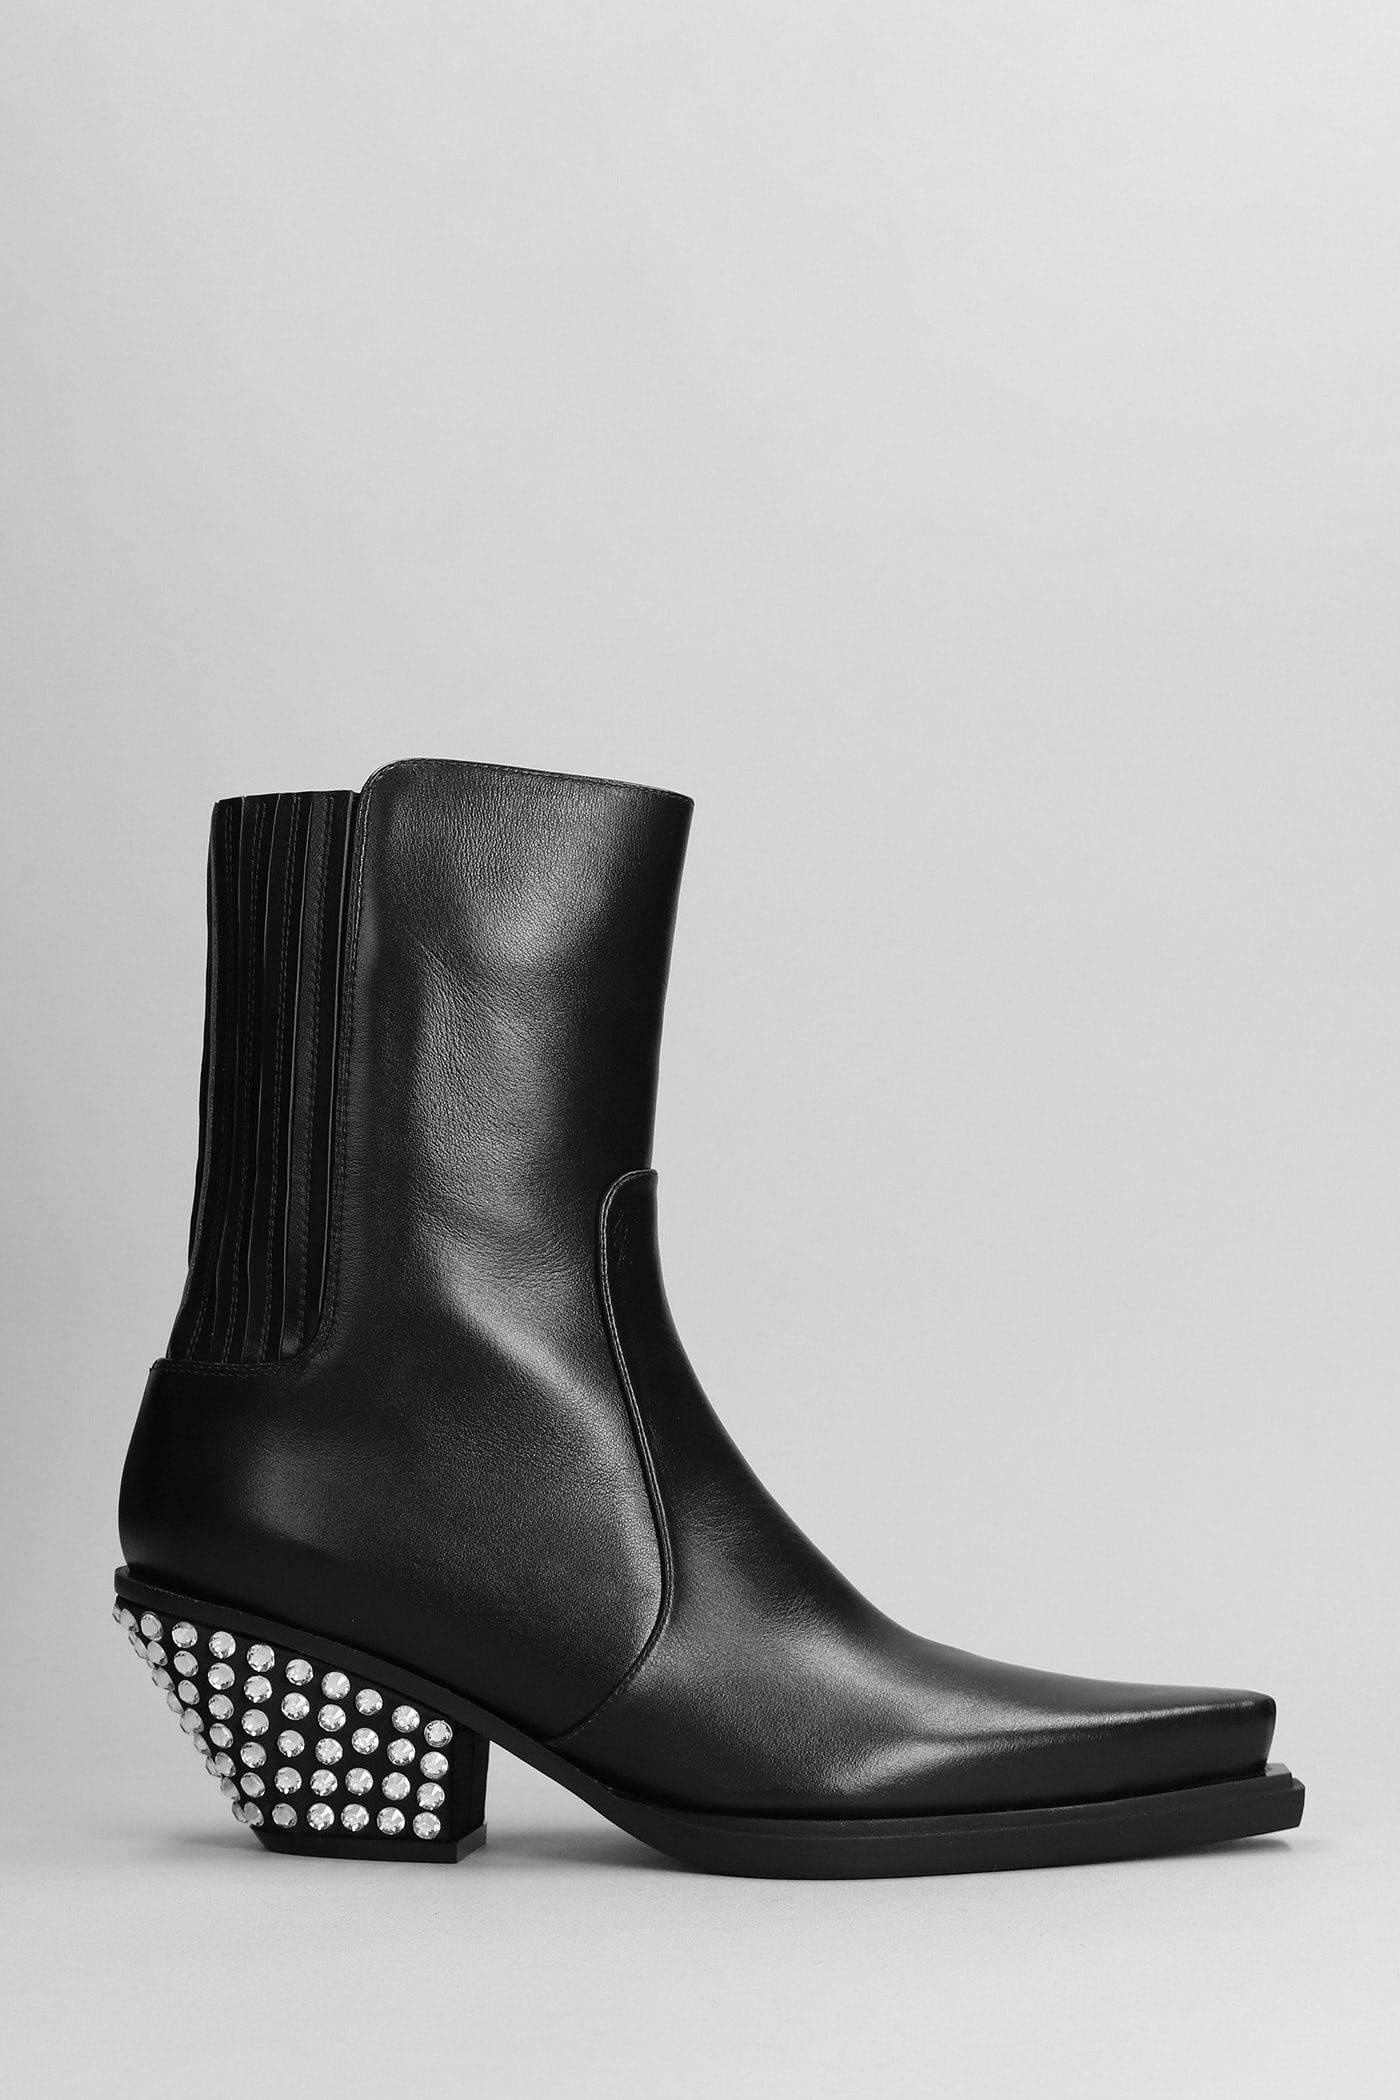 Giuseppe Zanotti Texan Ankle Boots In Black Leather